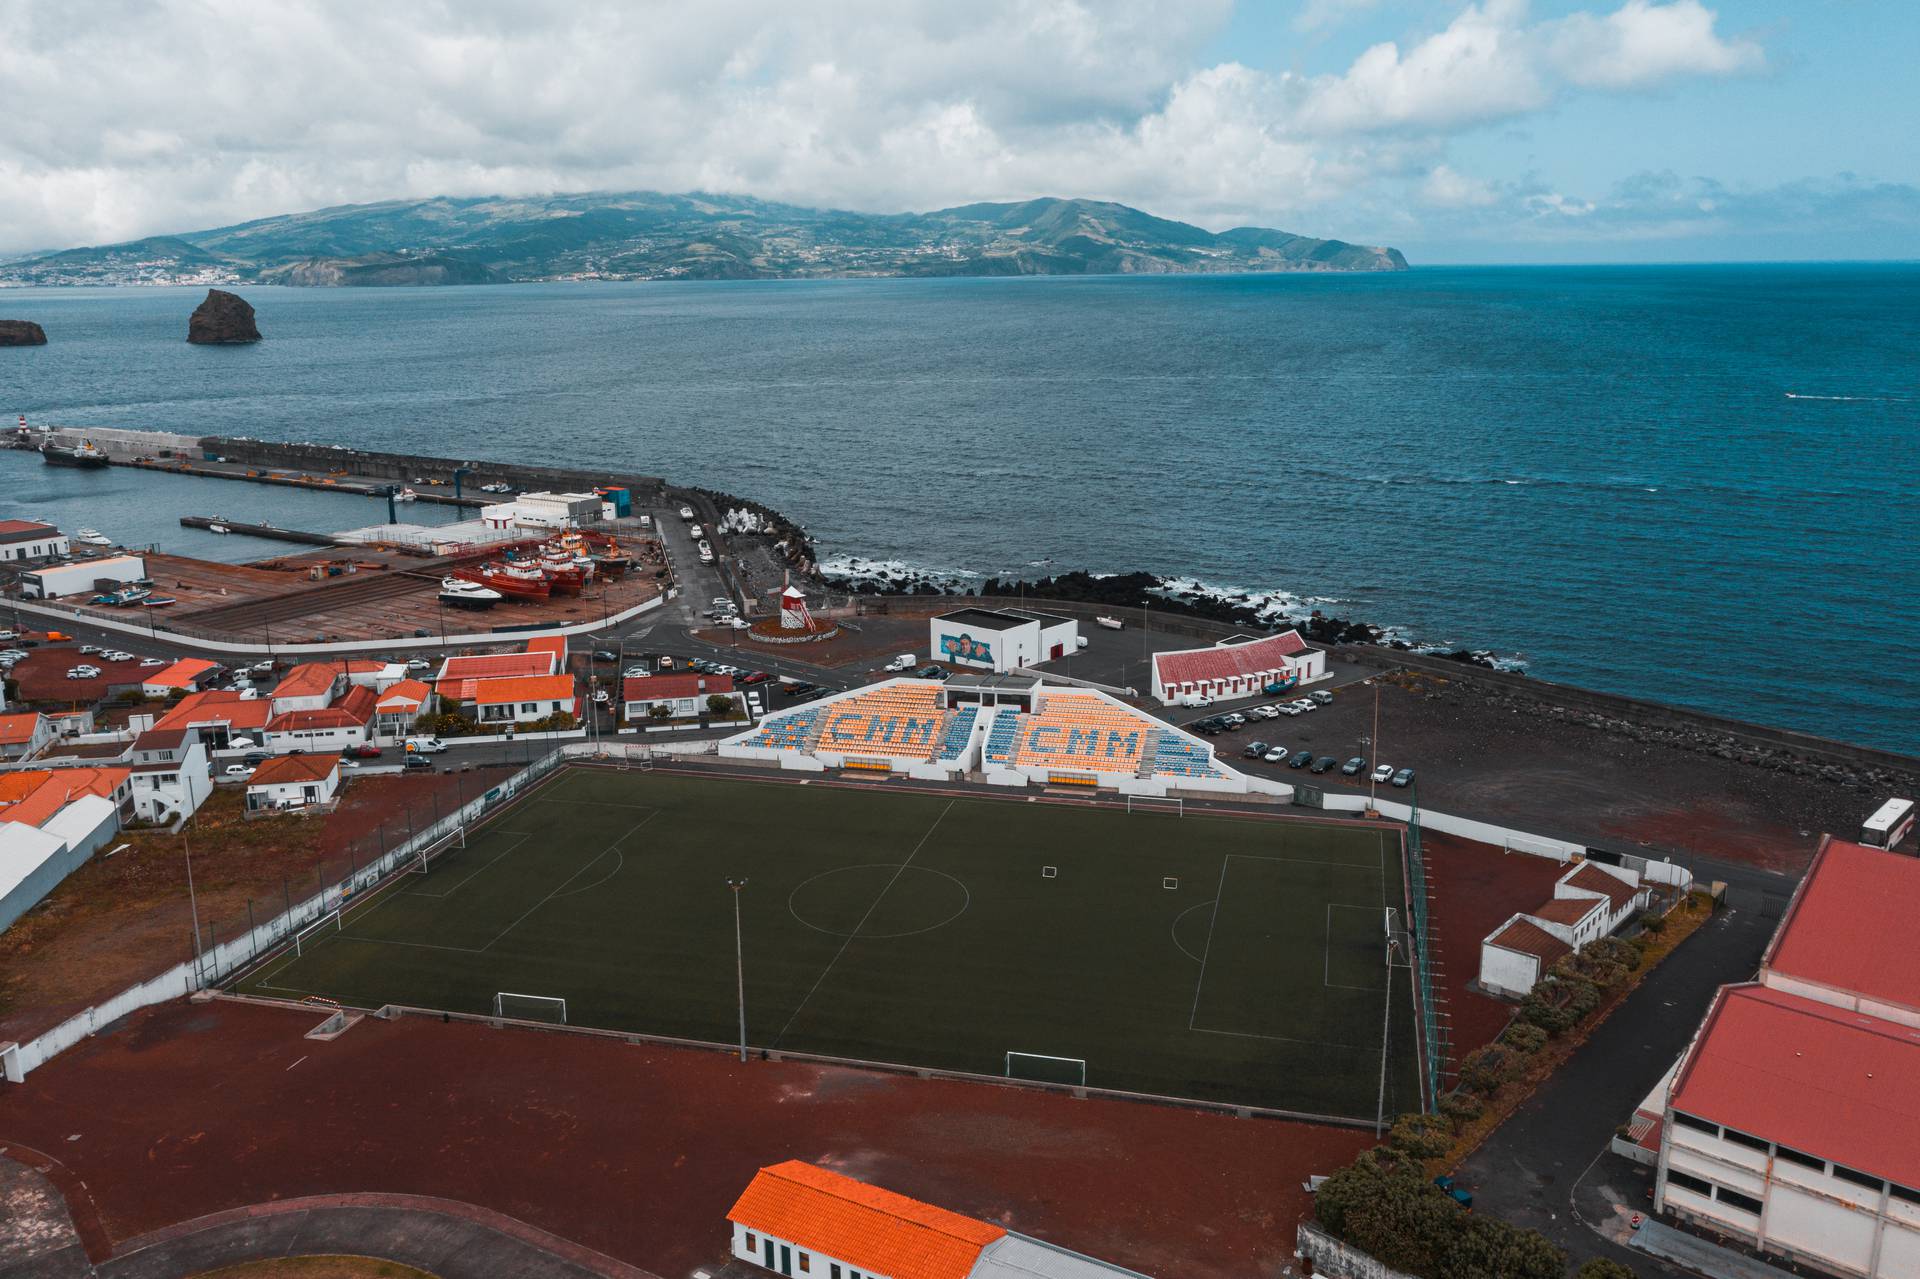 Football field in Pico, The Azores. Pico views and trouble parking at the whaling museum